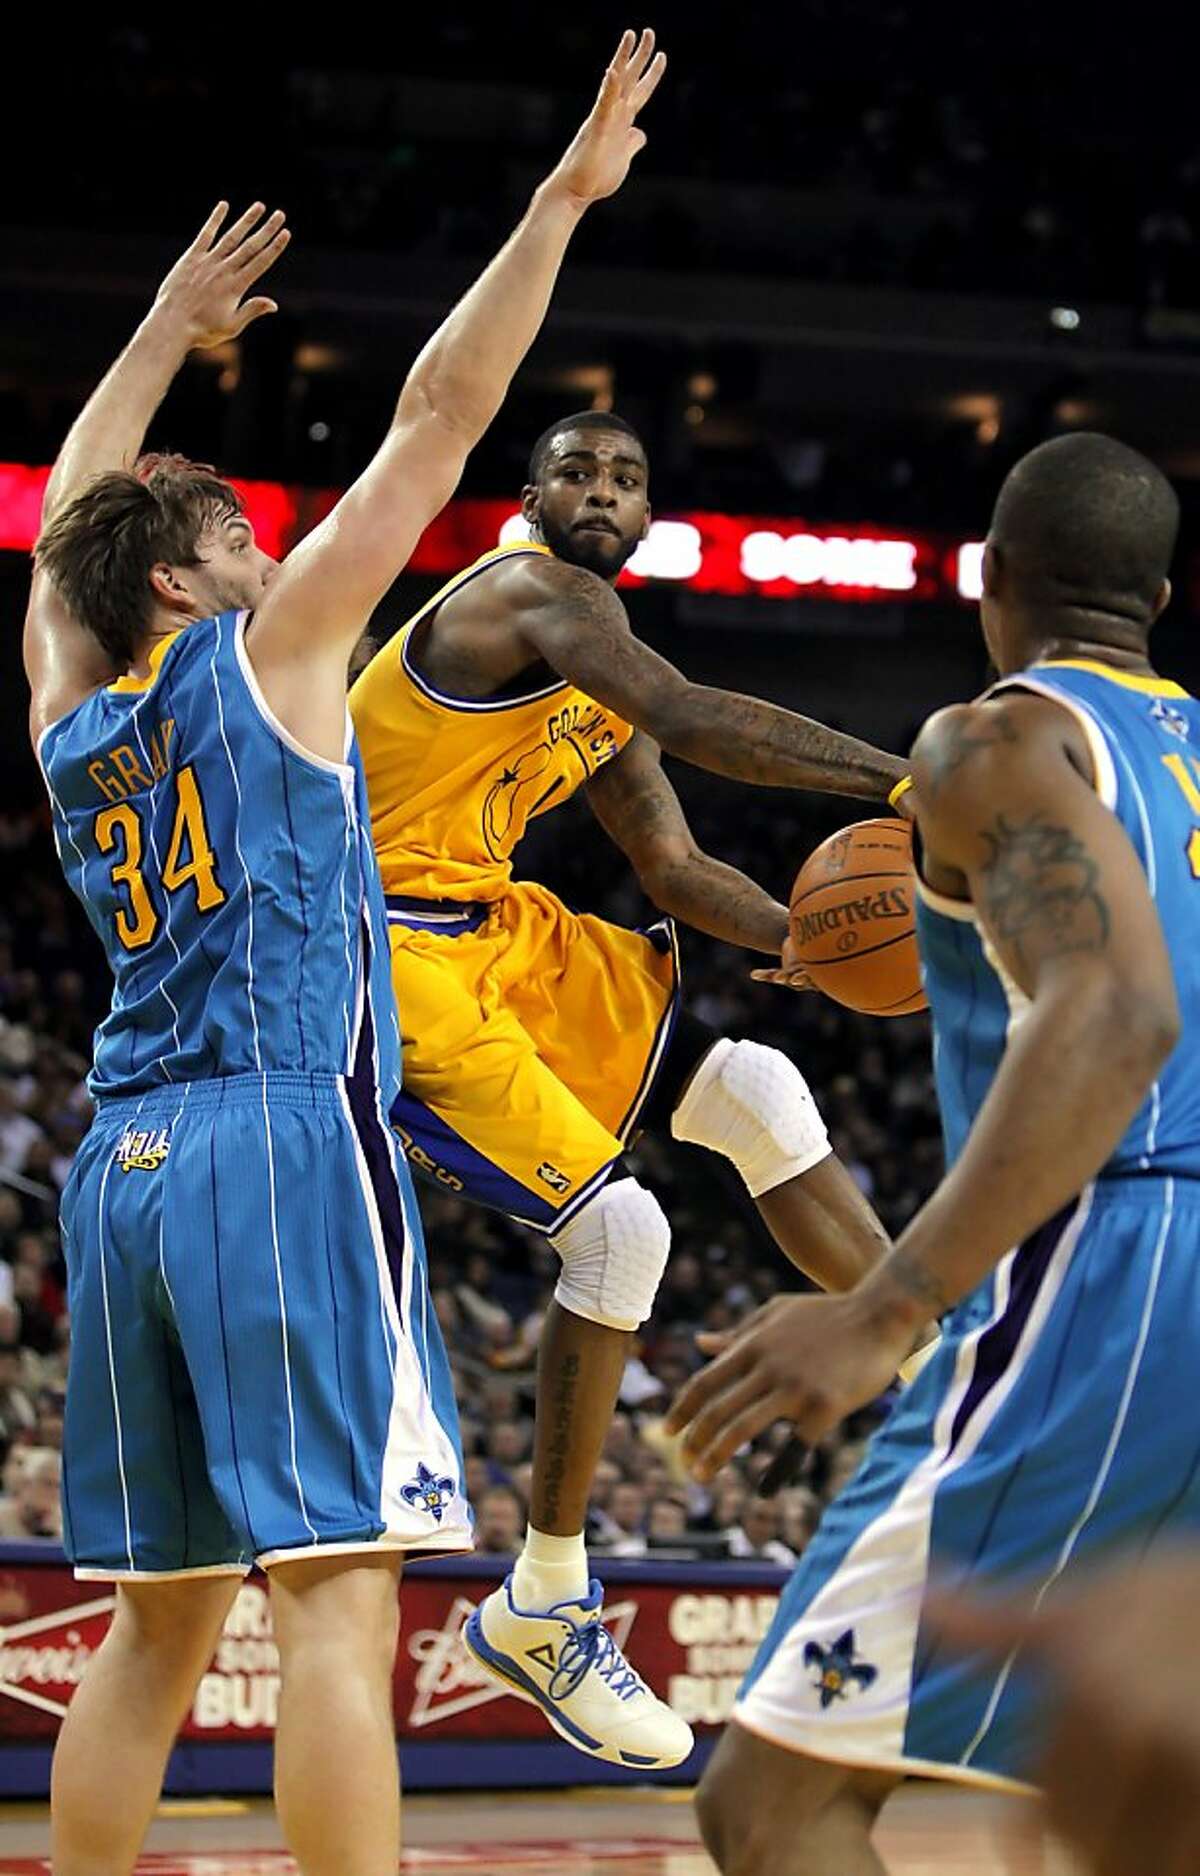 Dorrell Wright passes near the basket in the first half. The Golden State Warriors played the New Orleans Hornets at Oracle Arena in Oakland, Calif., on Tuesday, February 15, 2011. Ran on: 02-16-2011 Dorell Wright maneuvers to make a pass. Wright had 16 points and five assists.